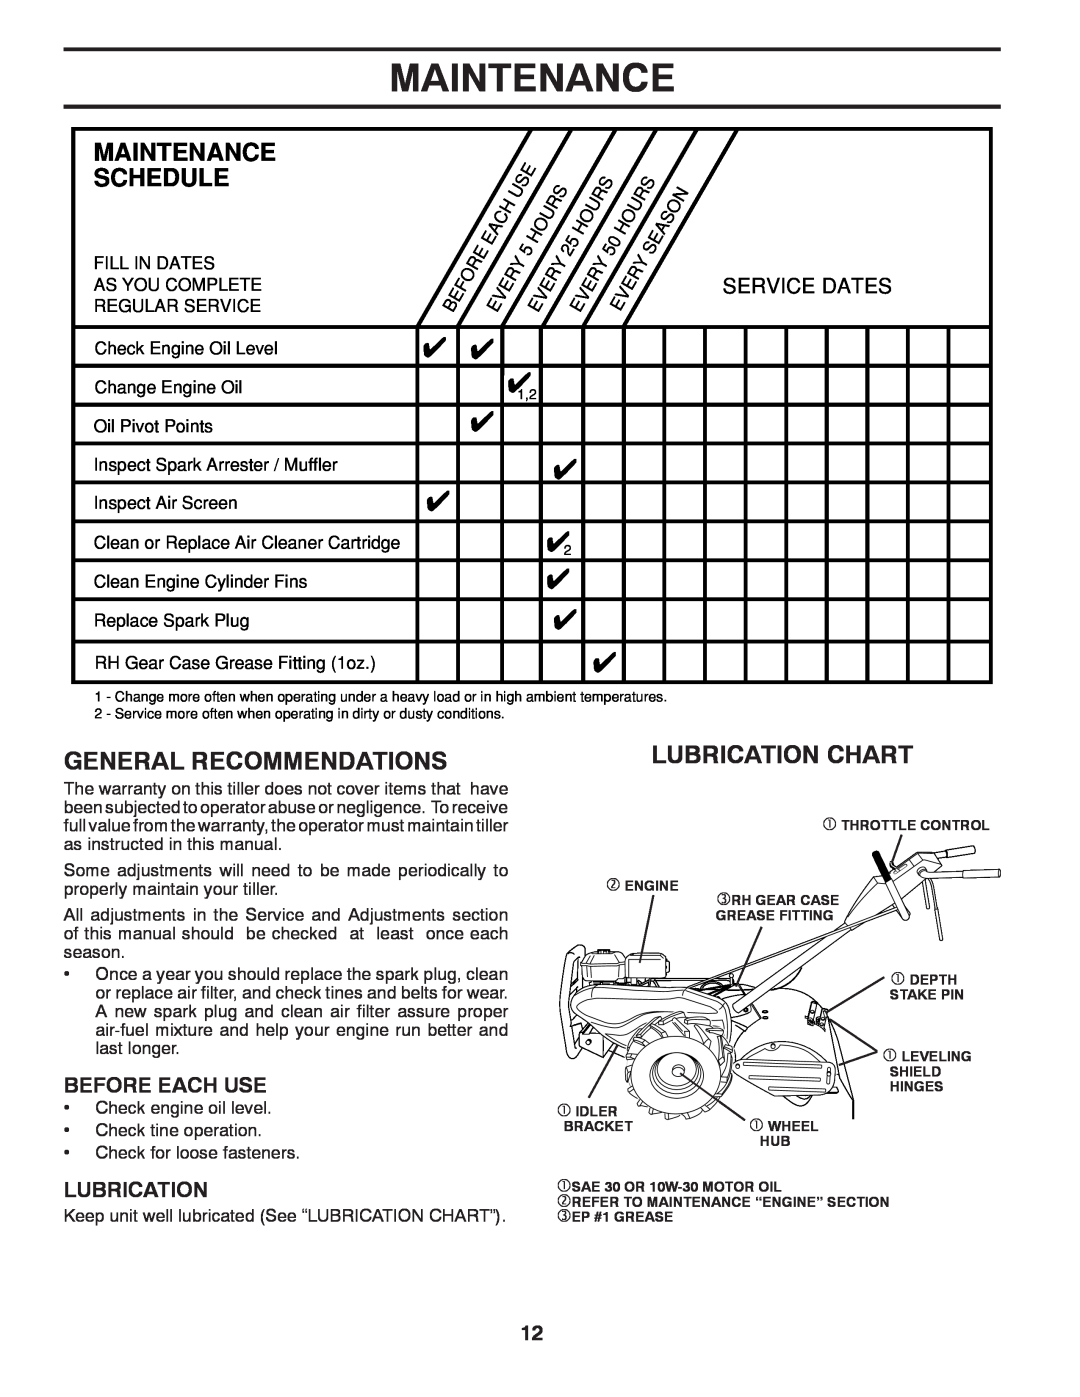 Poulan DRT875 manual Maintenance Schedule, General Recommendations, Lubrication Chart, Before Each Use, Service Dates 